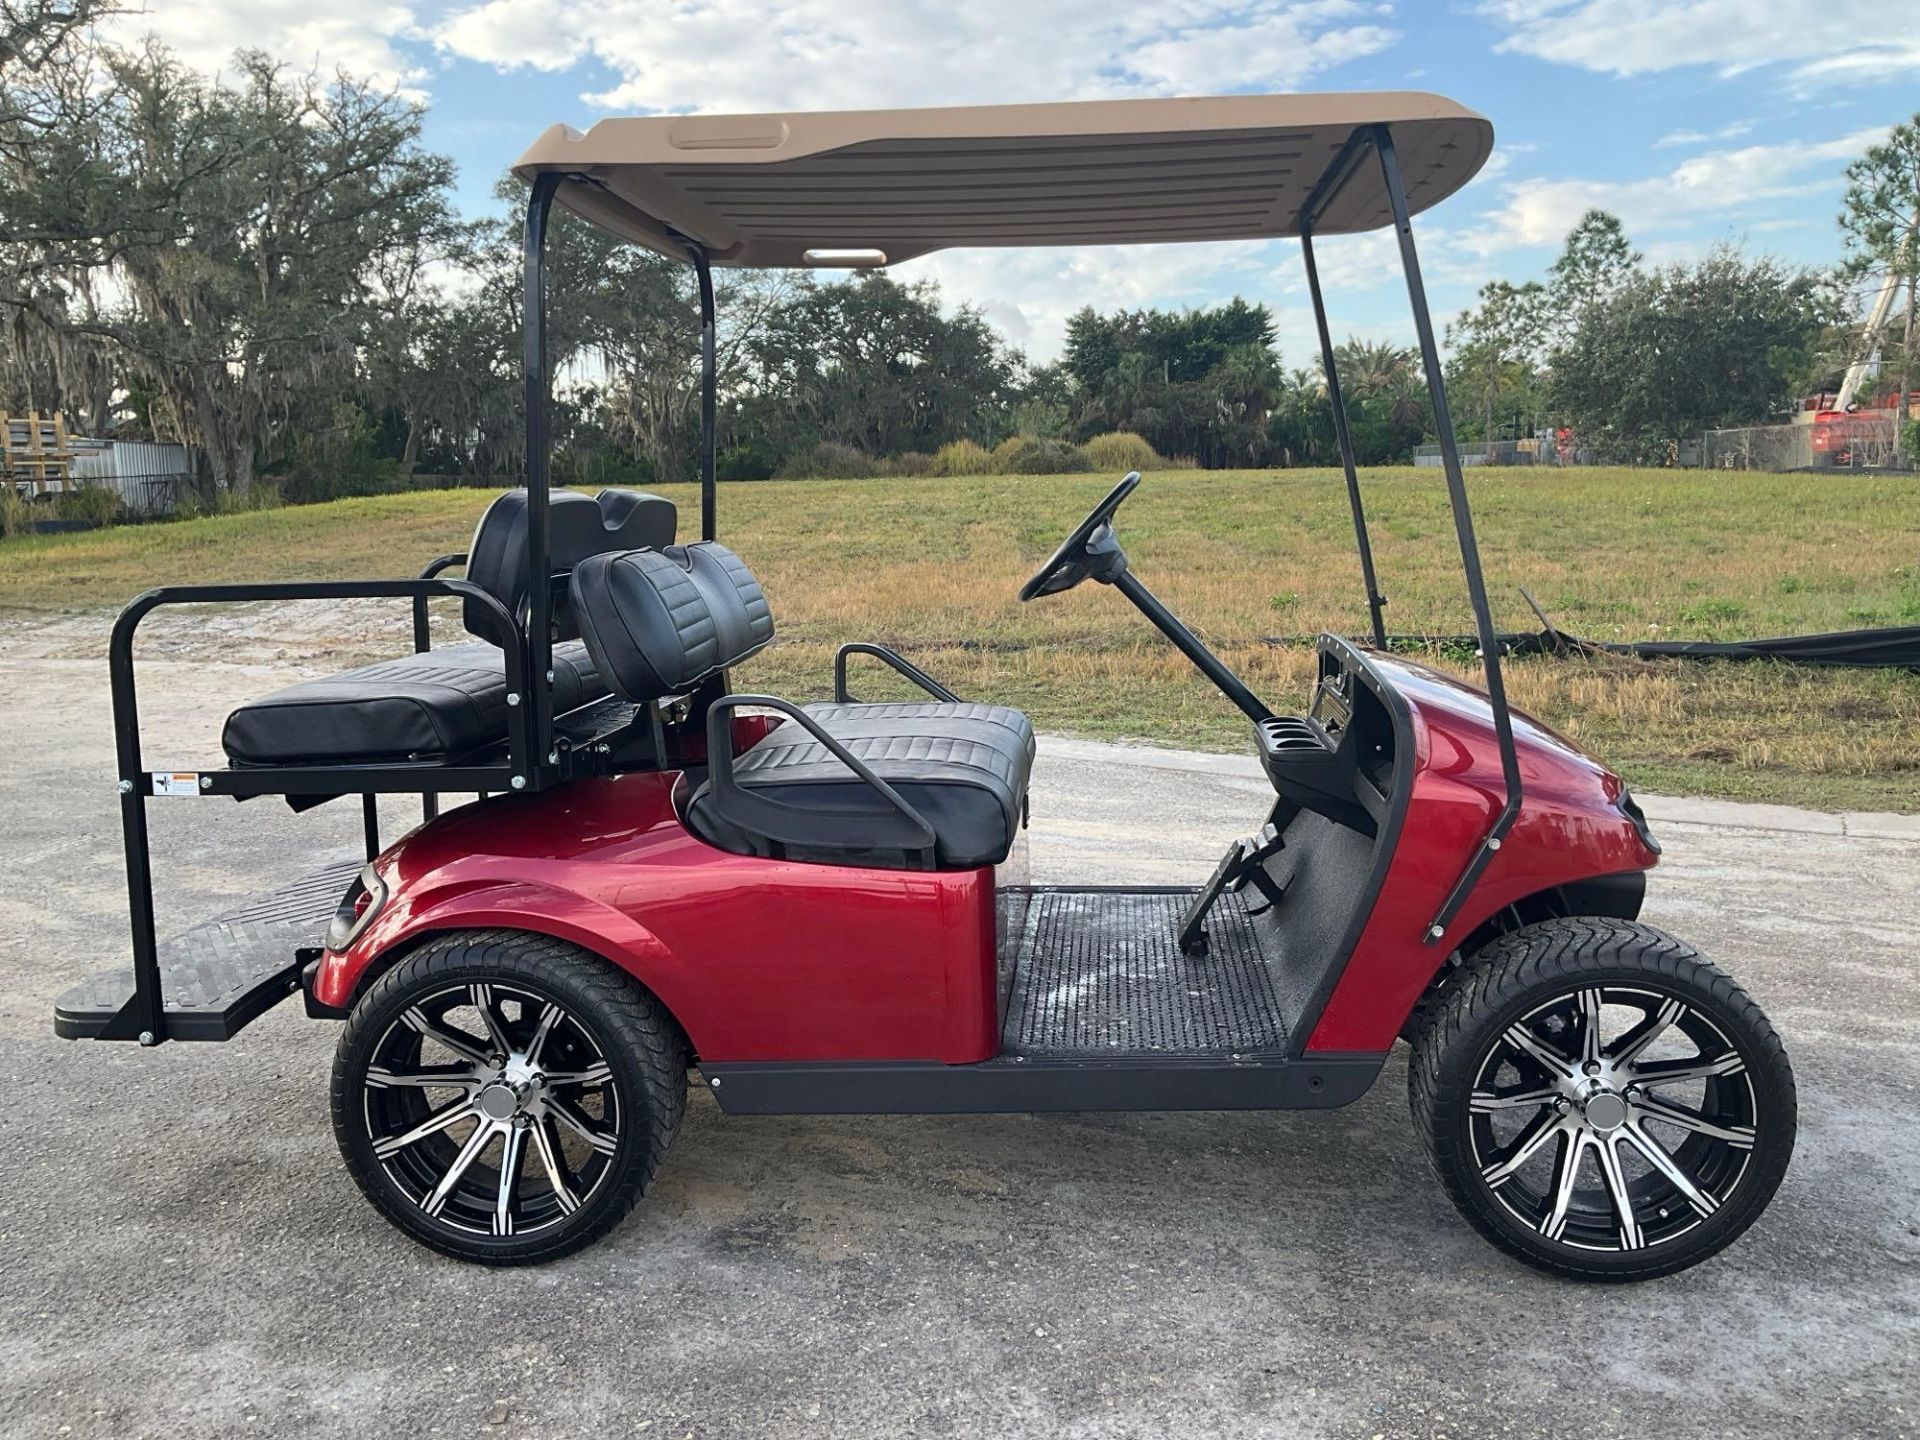 EZ-GO GOLF CART , ELECTRIC, BACK SEAT FOLD DOWN TO FLAT BED, BATTERY CHARGER INCLUDED, BILL OF SALE - Image 7 of 13